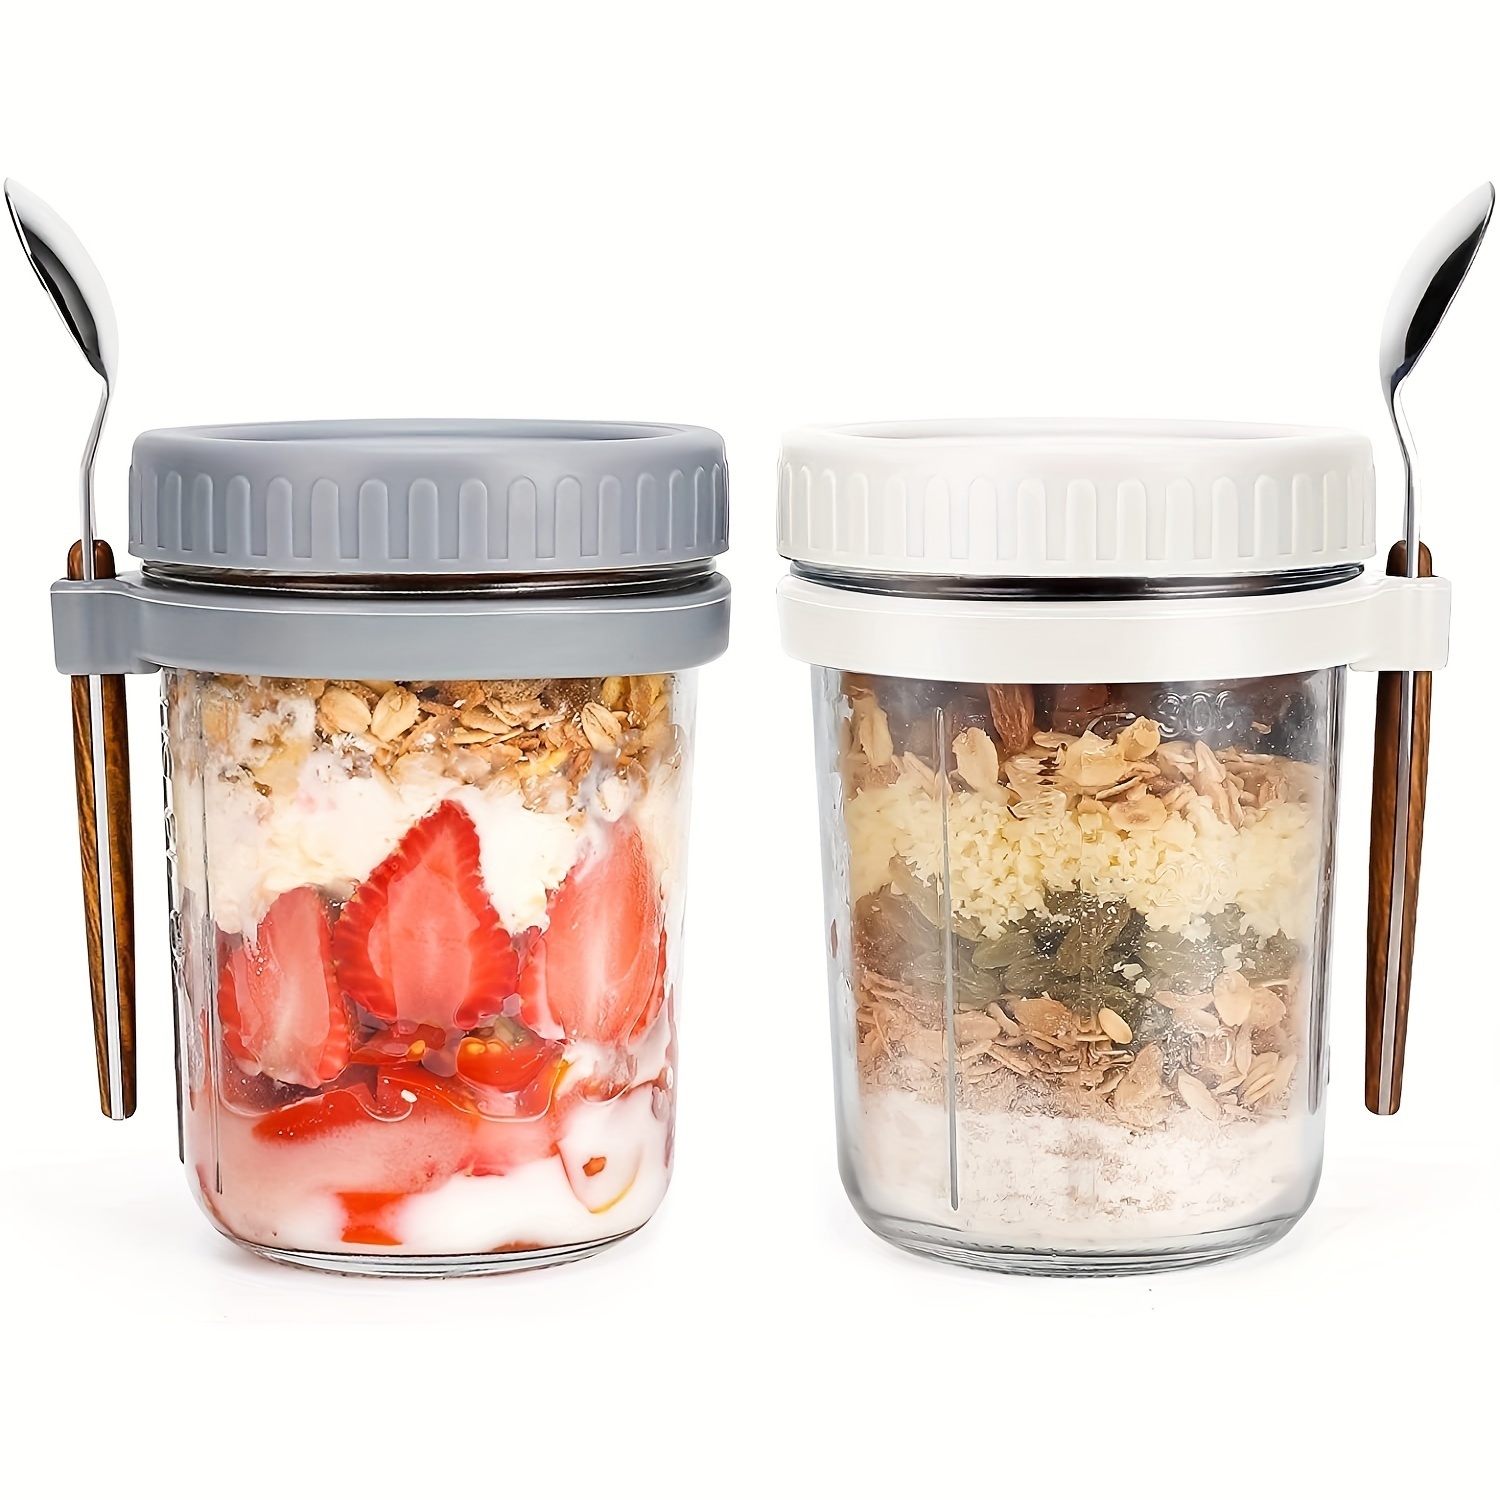  Tekuve Overnight Oats Containers with Lids and Spoon 2